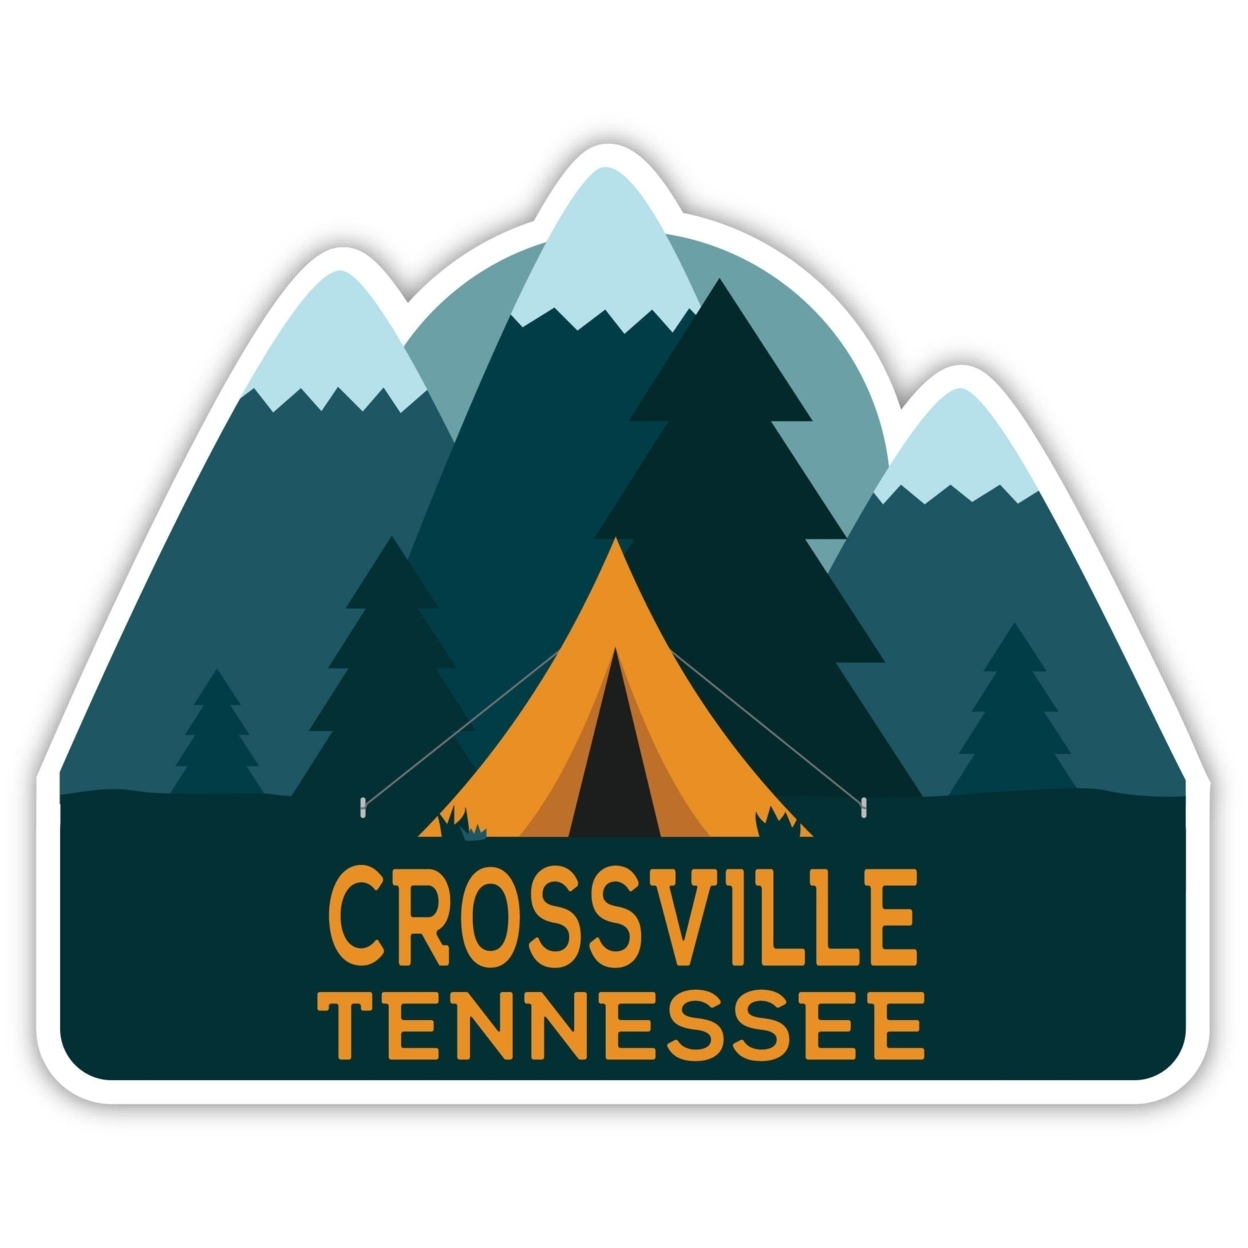 Crossville Tennessee Souvenir Decorative Stickers (Choose Theme And Size) - Single Unit, 4-Inch, Tent